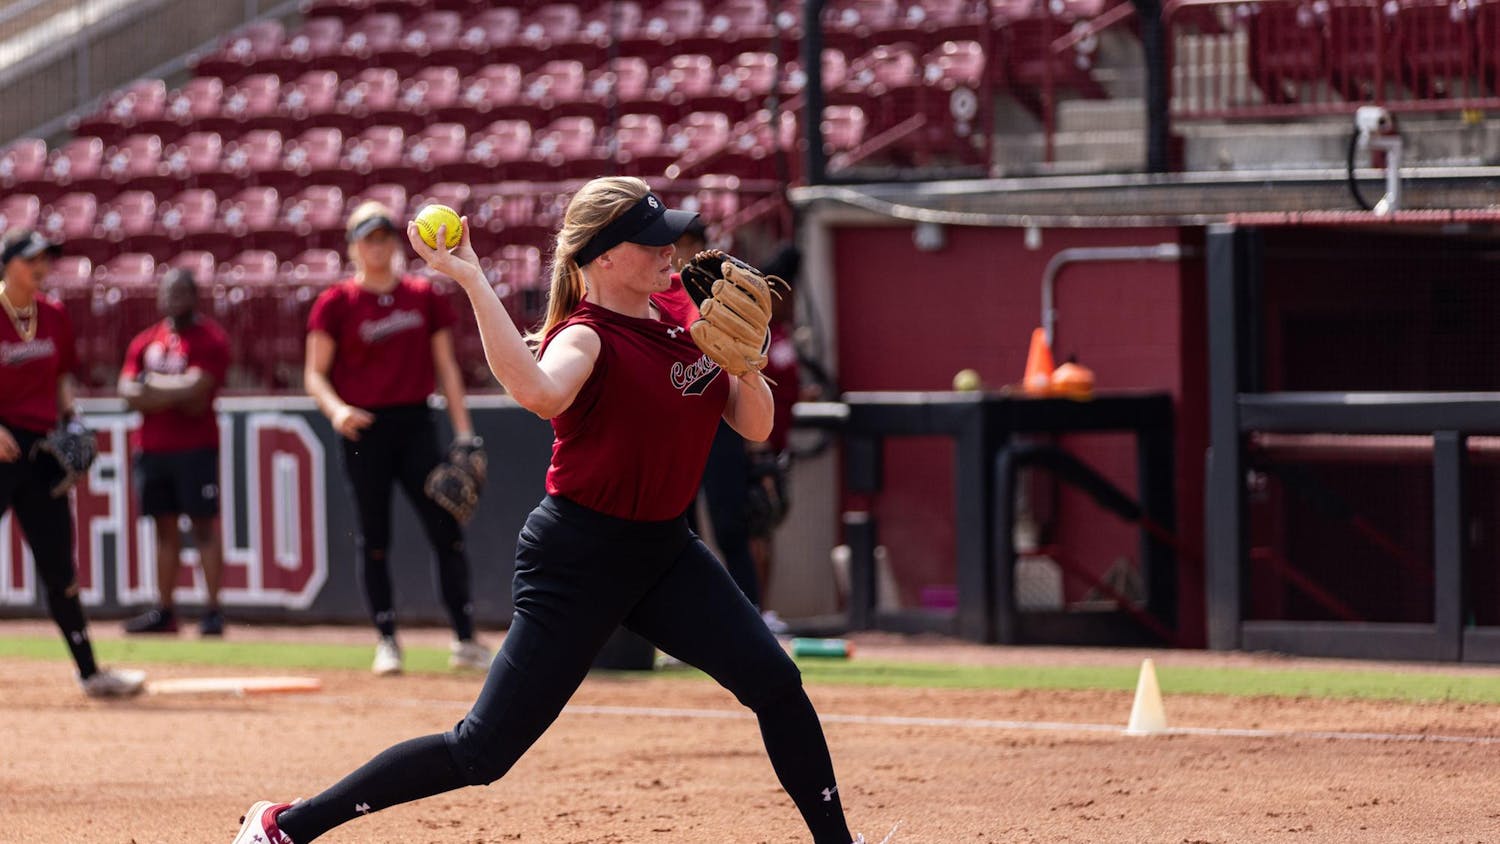 Fifth-year pitcher Alana Vawter throws the ball during a South Carolina softball practice. Vawter previously played at Stanford University, where she finished her four years within the top-five in wins, shutouts, strikeouts and innings pitched.